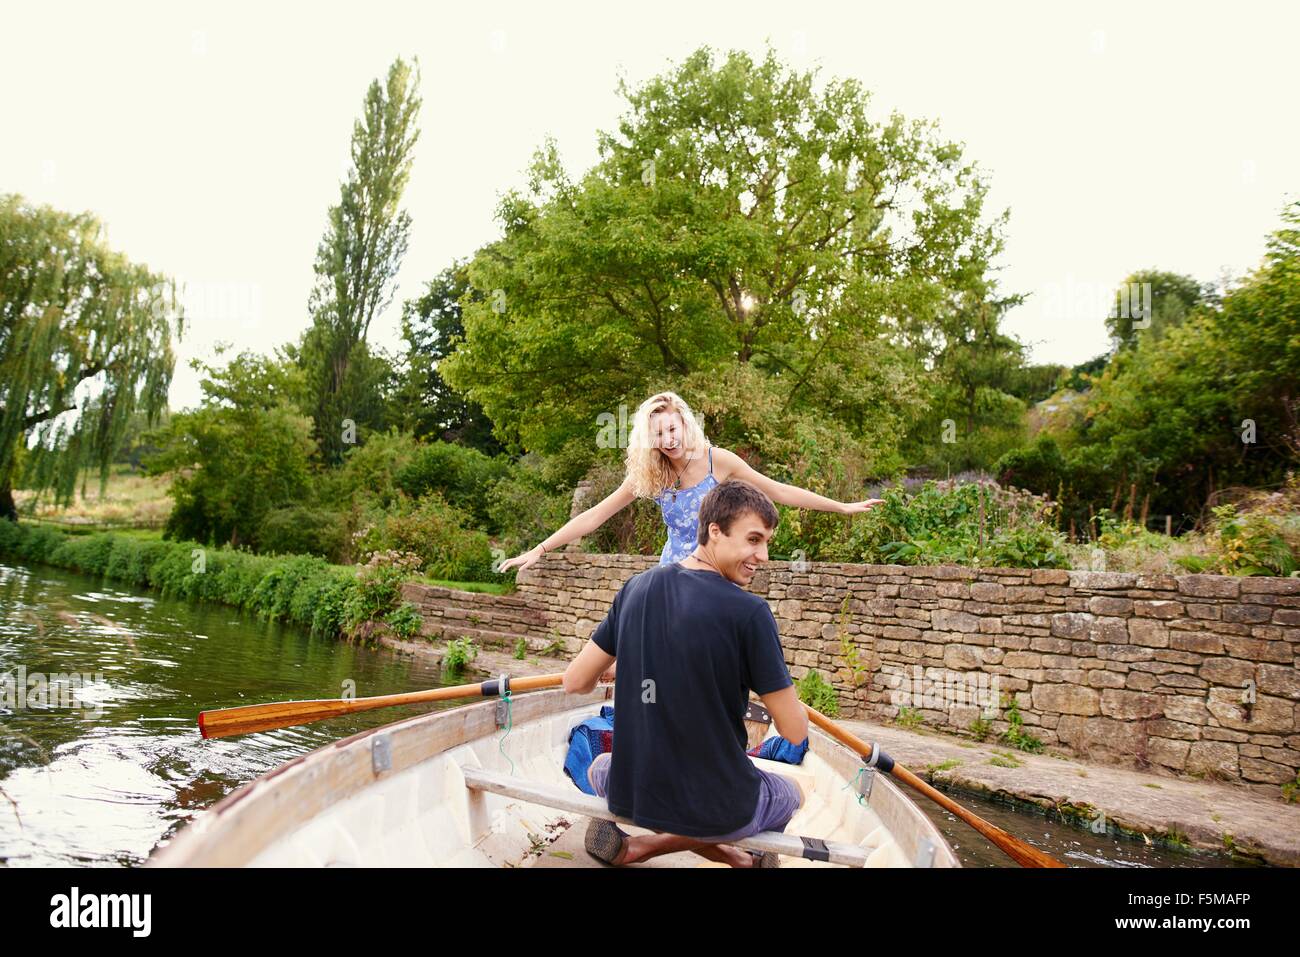 Rear view of young woman with boyfriend standing in rowing boat on river Stock Photo